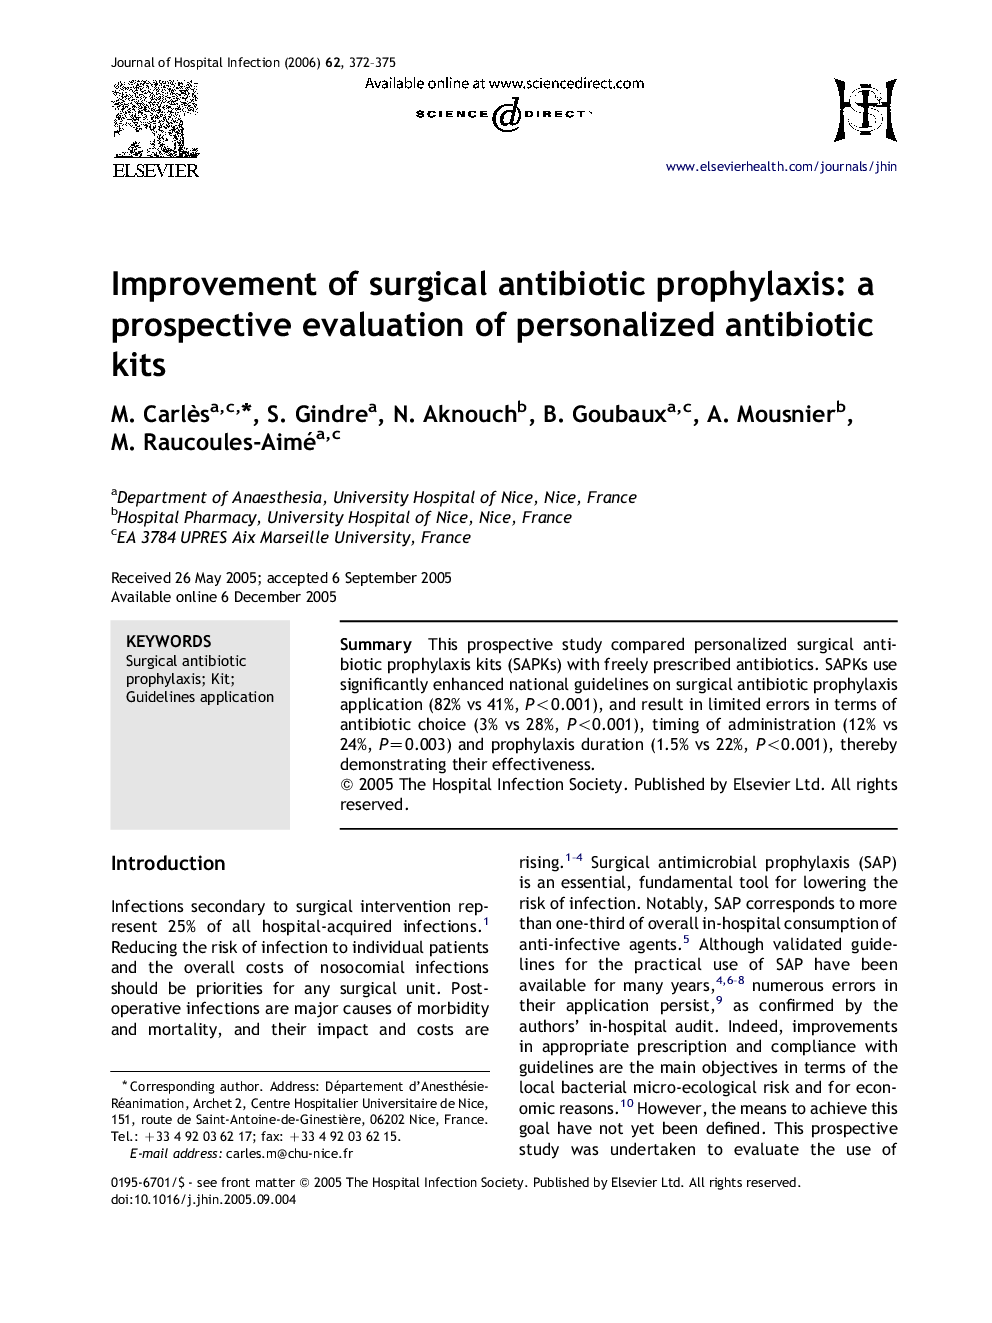 Improvement of surgical antibiotic prophylaxis: a prospective evaluation of personalized antibiotic kits